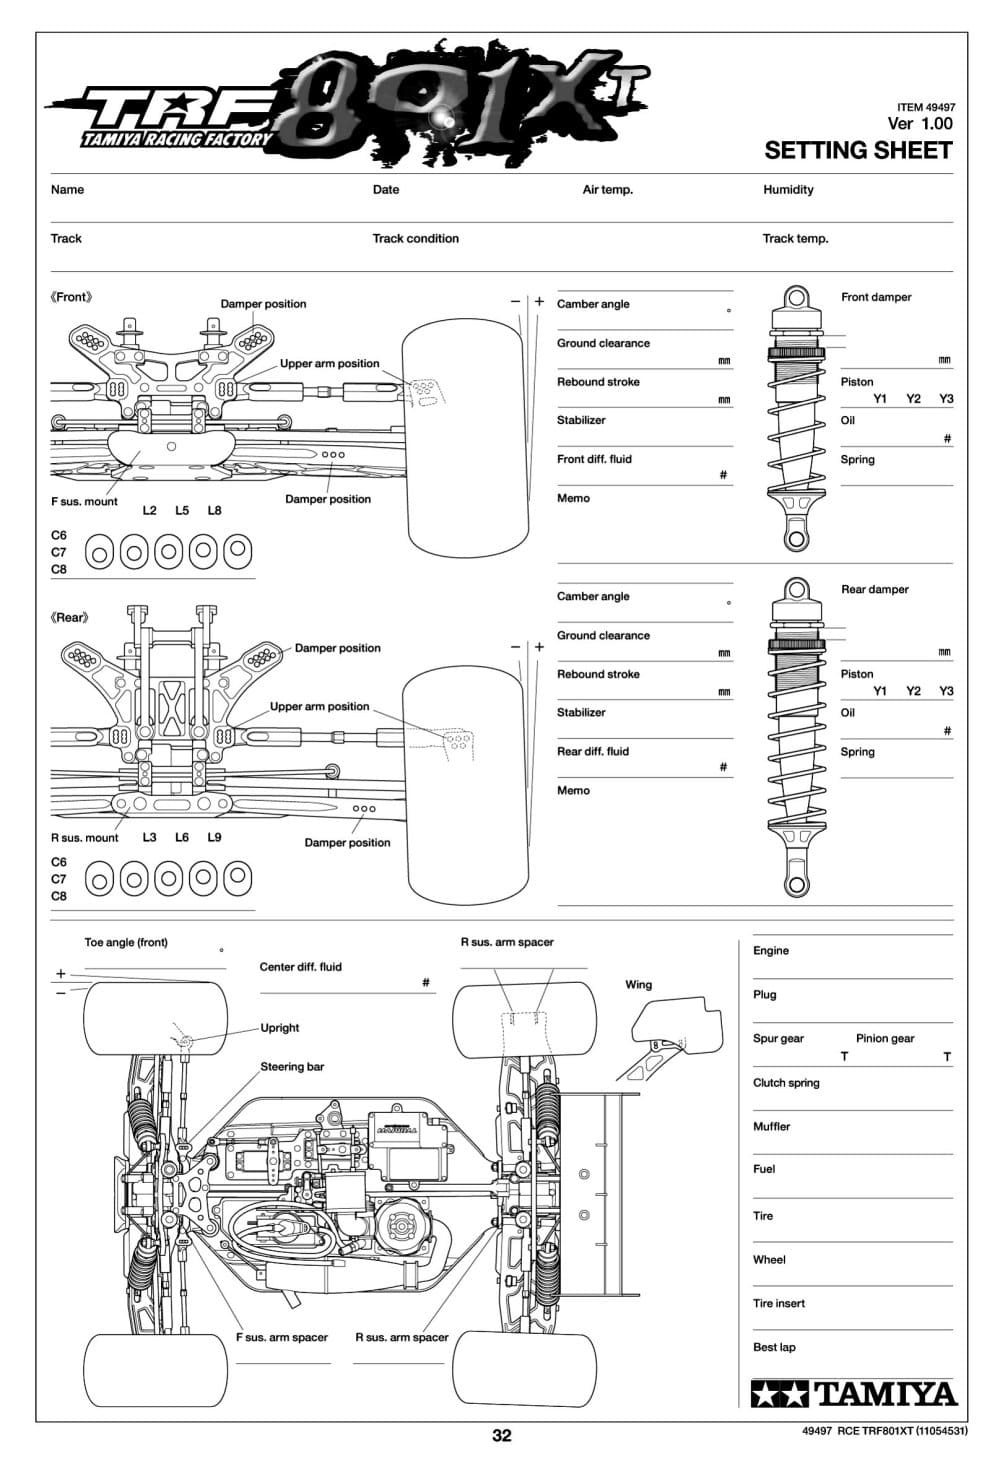 Tamiya - TRF801Xt Performance Package Version Chassis - Manual - Page 32